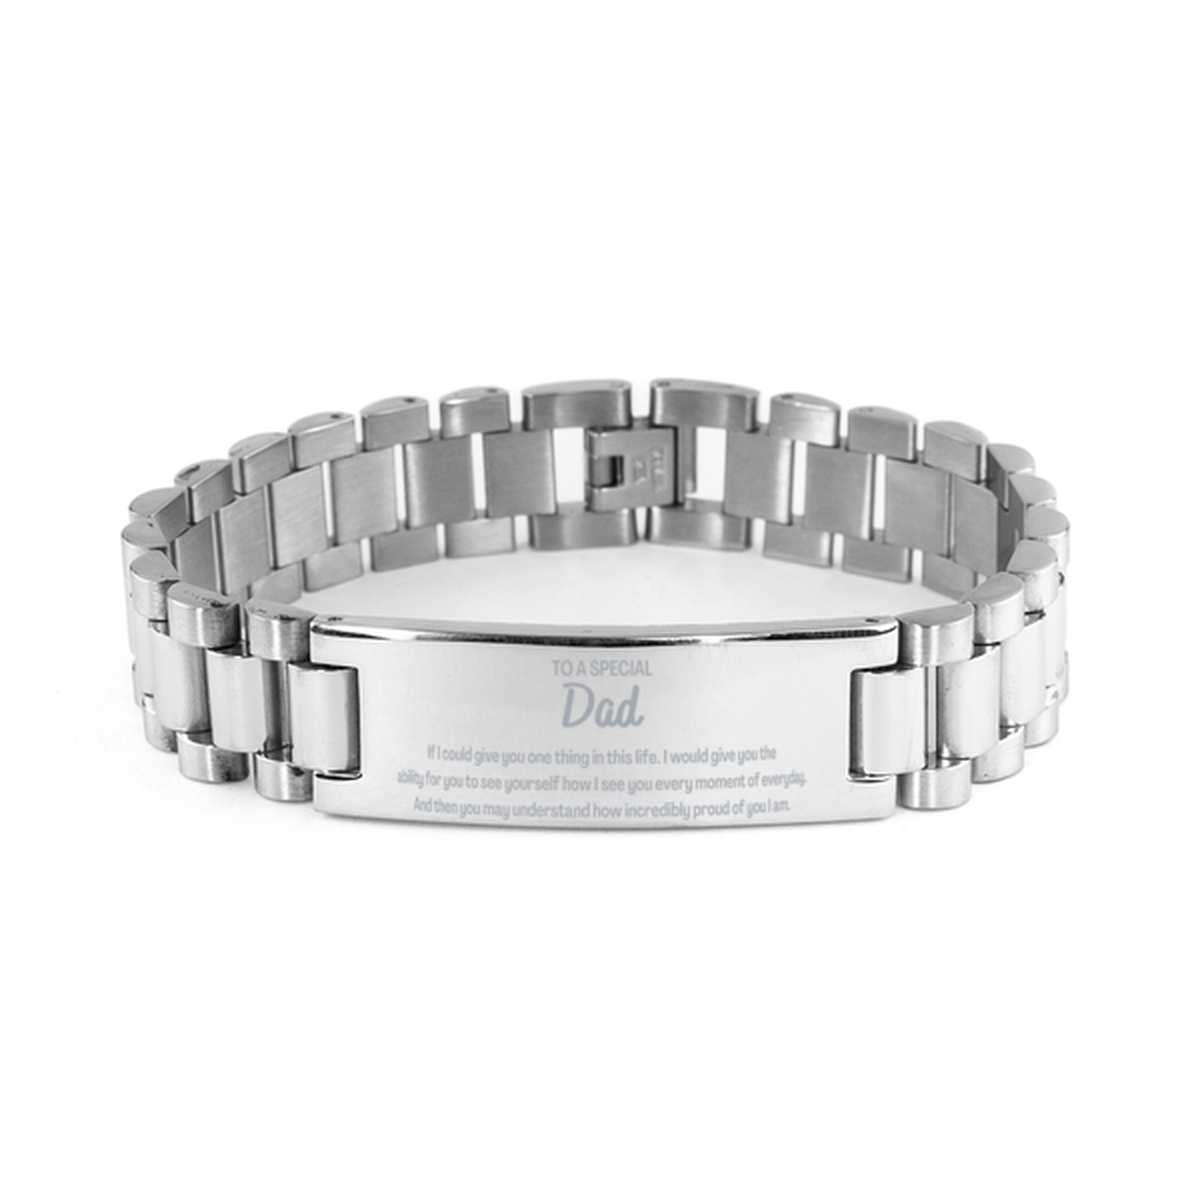 To My Dad Ladder Stainless Steel Bracelet, Gifts For Dad Engraved, Inspirational Gifts for Christmas Birthday, Epic Gifts for Dad To A Special Dad how incredibly proud of you I am